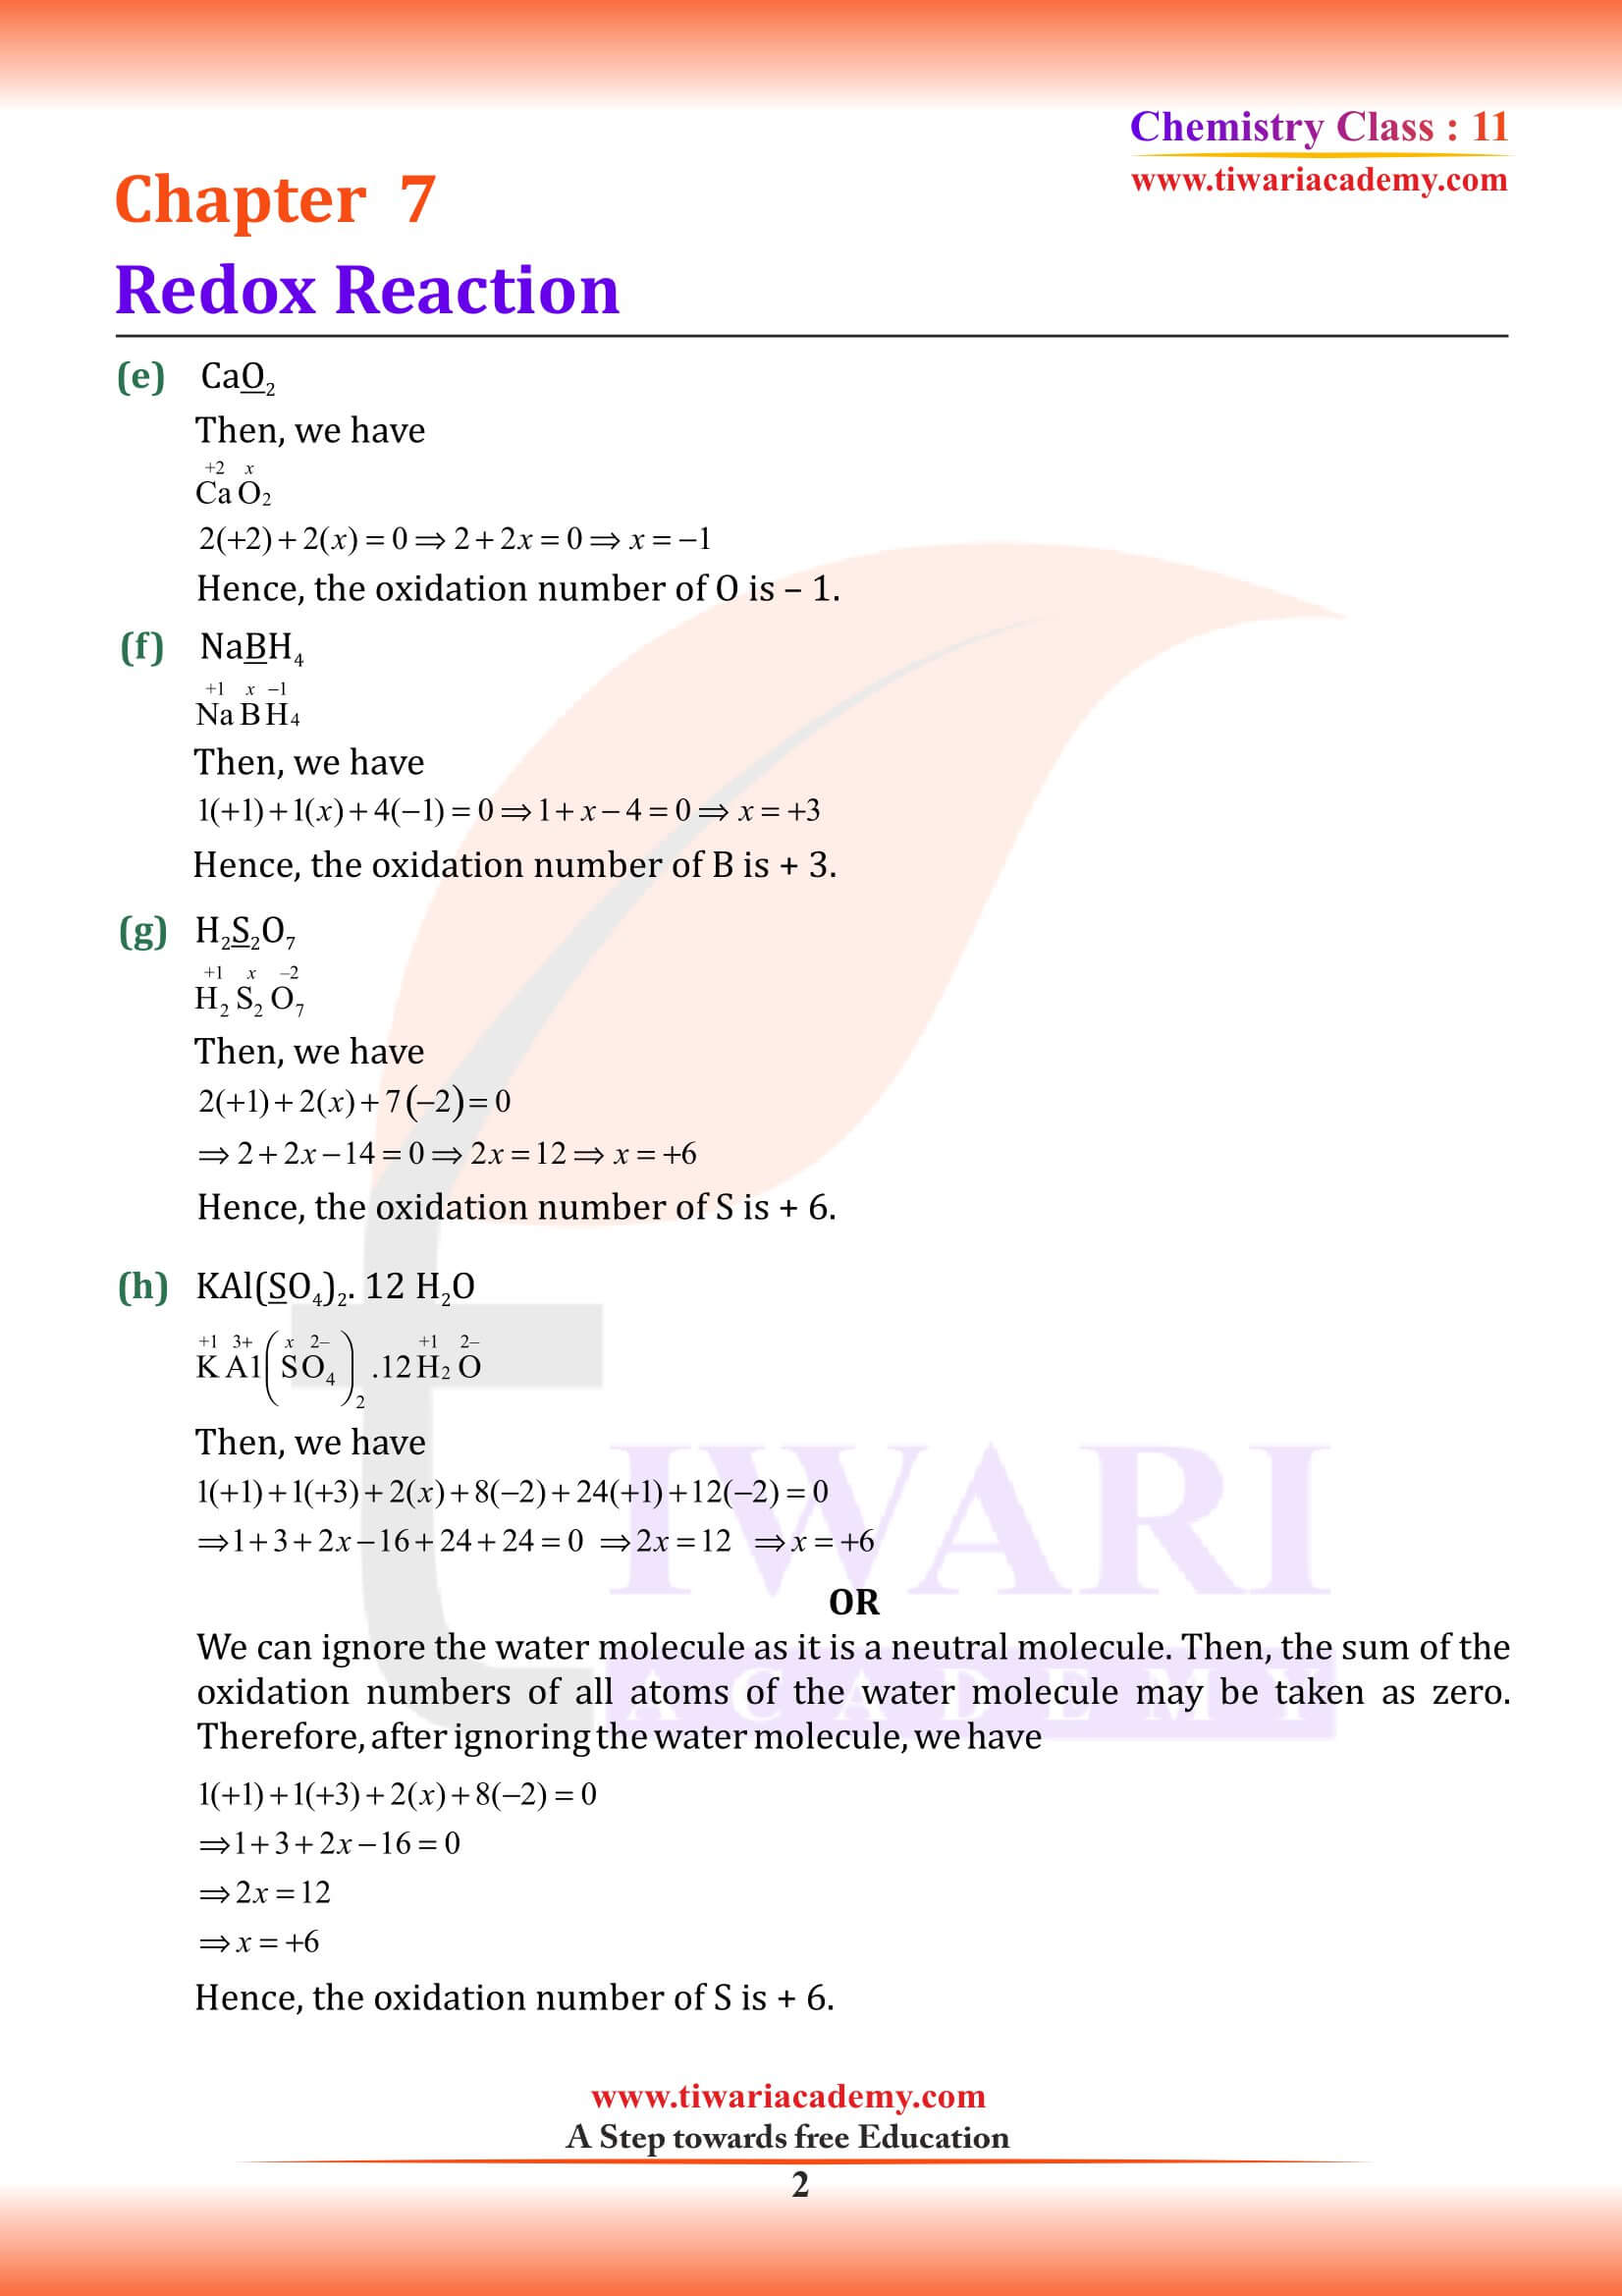 NCERT Class 11 Chemistry Chapter 7 Redox Reactions